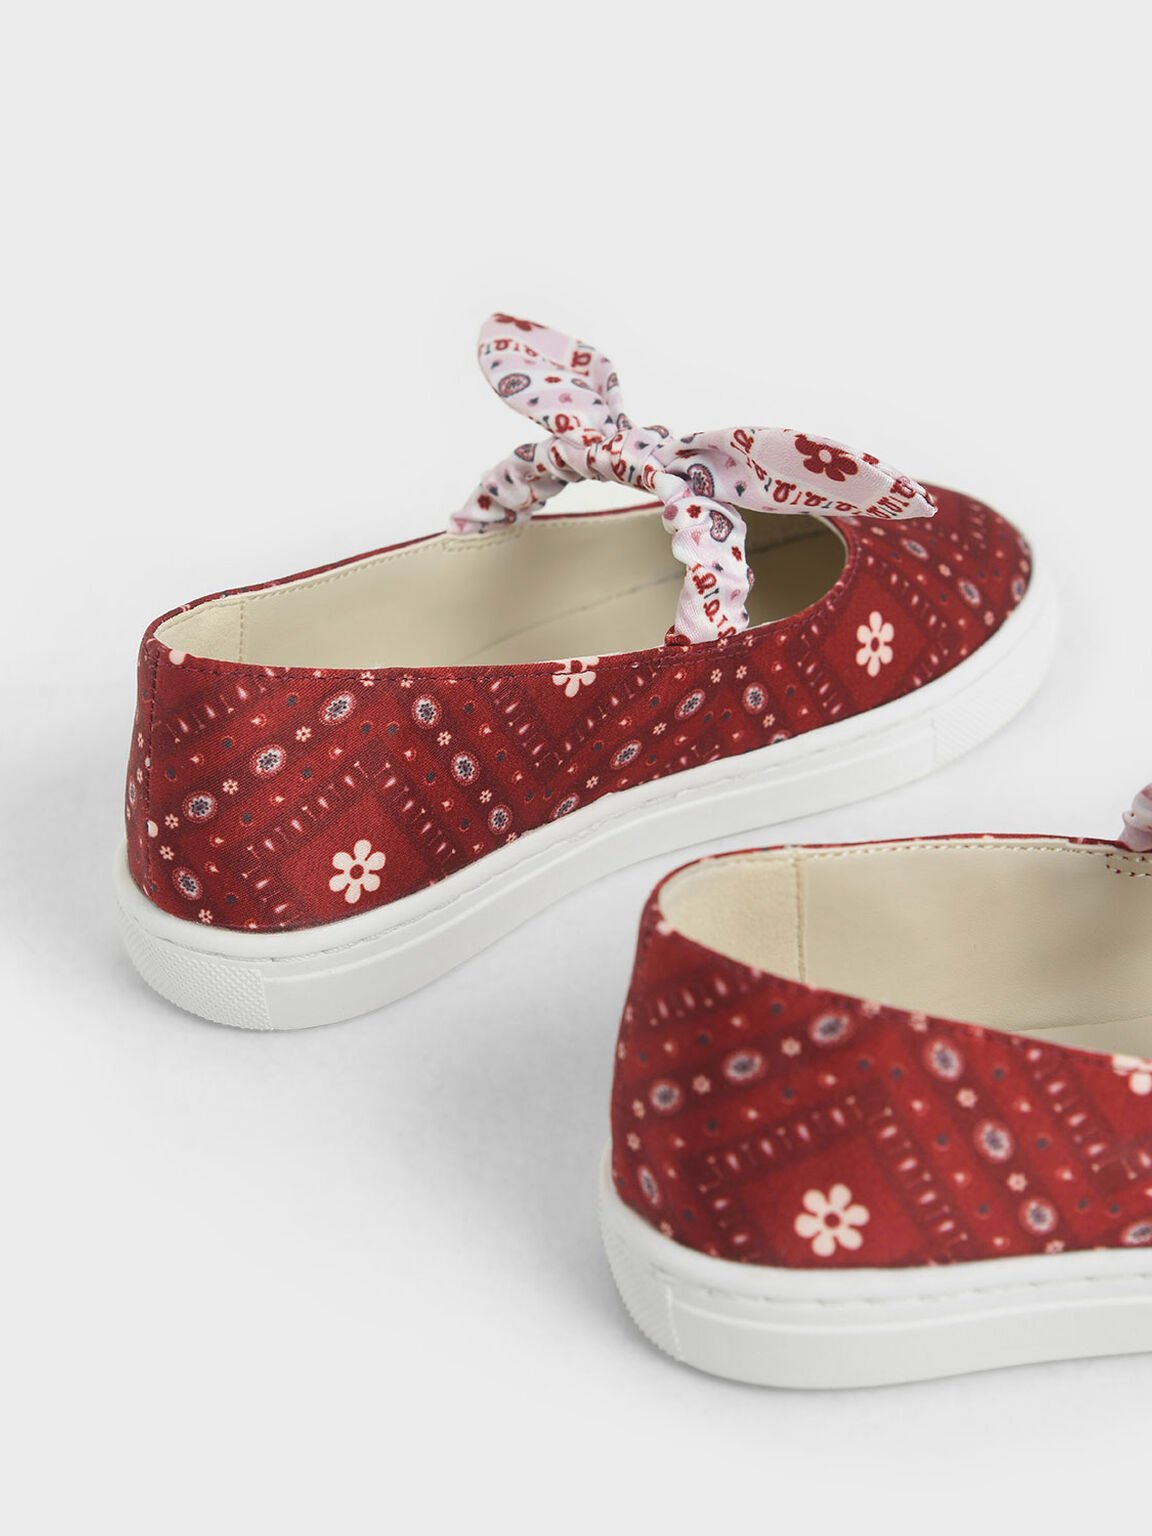 The Purpose Collection - Girls' Bandana Print Slip-On Sneakers, Red, hi-res